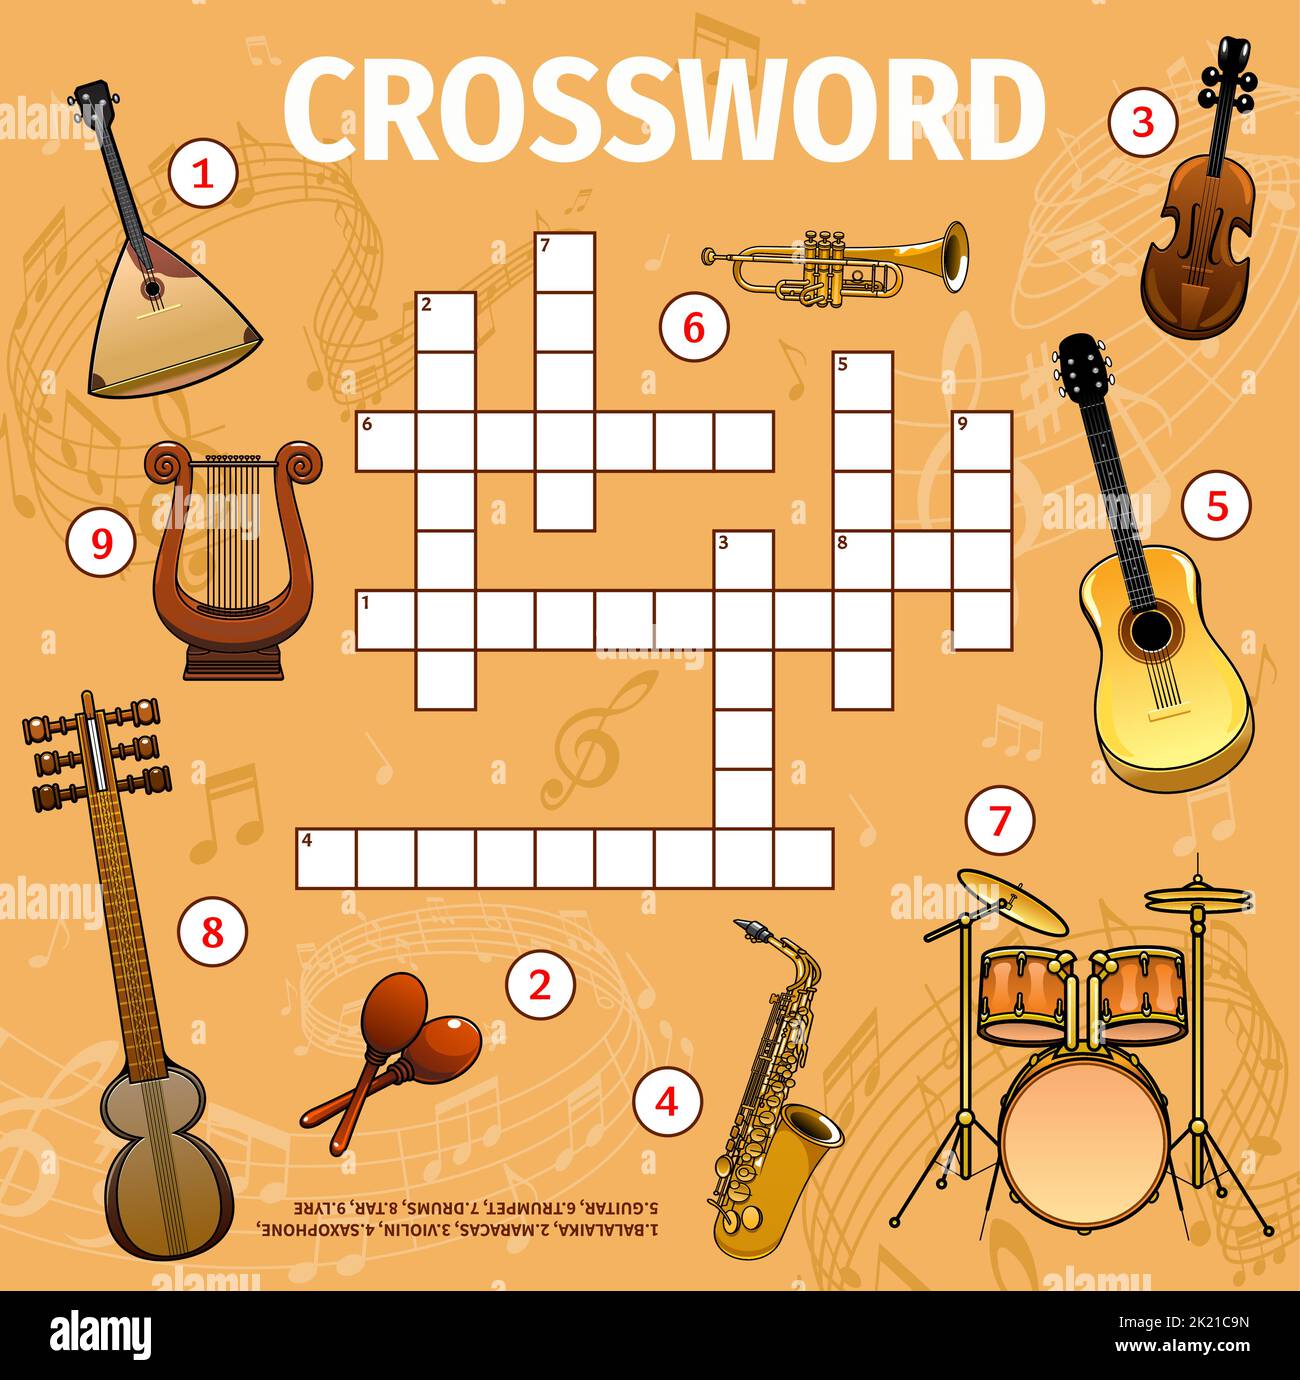 Musical instruments and sound waves crossword grid, worksheet to find word, vector quiz game. Kids puzzle crossword with music instruments, guitar or violin and saxophone, maracas, drums and trumpet Vector Image